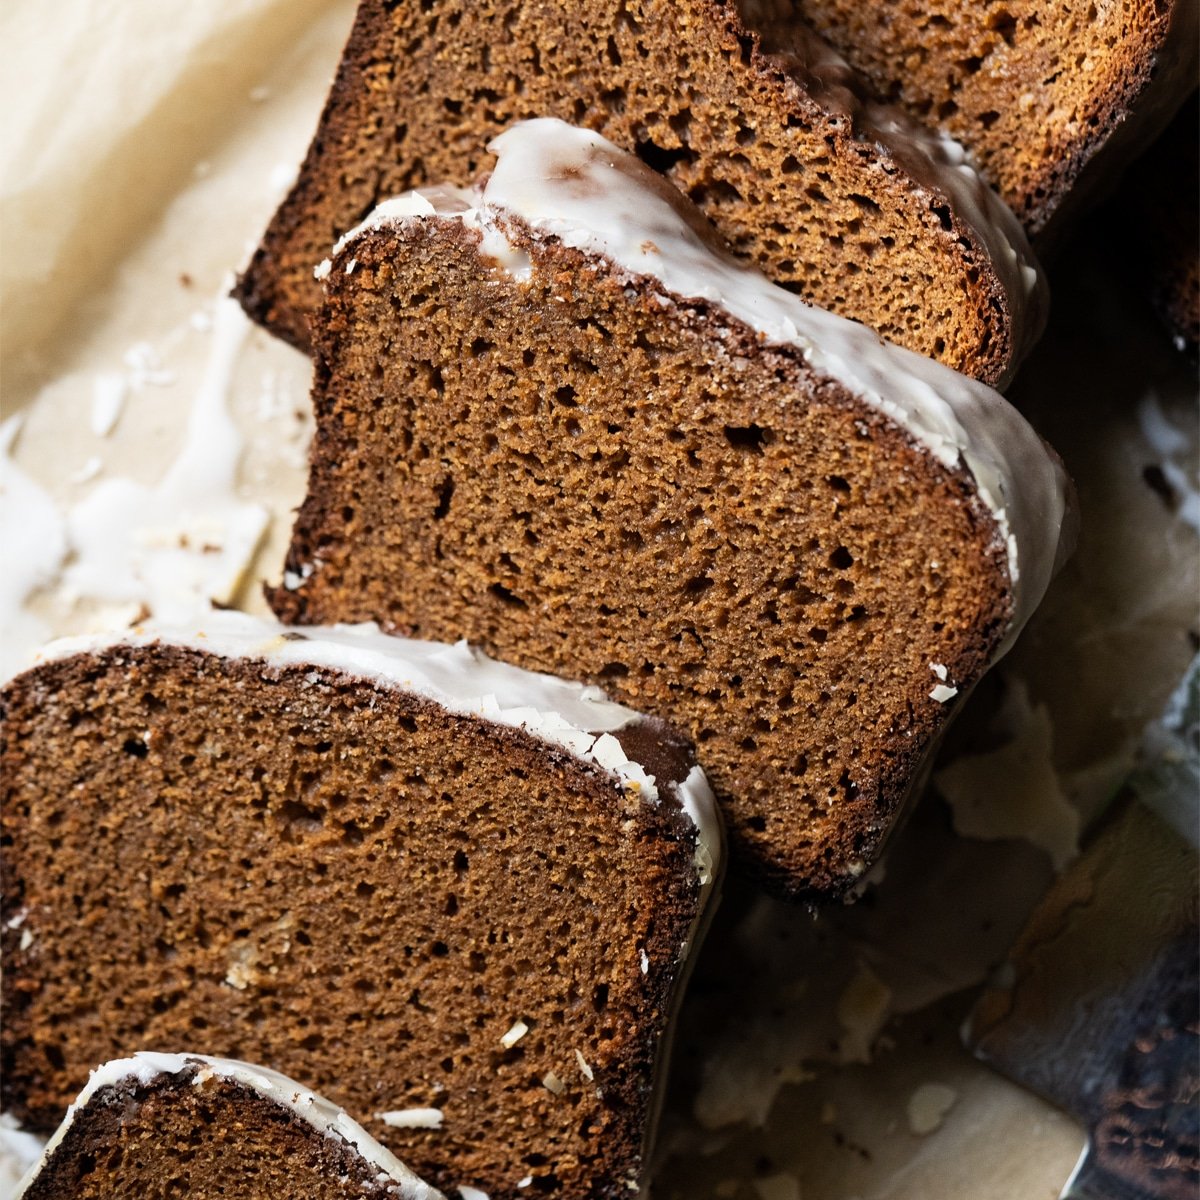 Sliced and freshly glazed low carb gingerbread loaf showing the fluffy texture